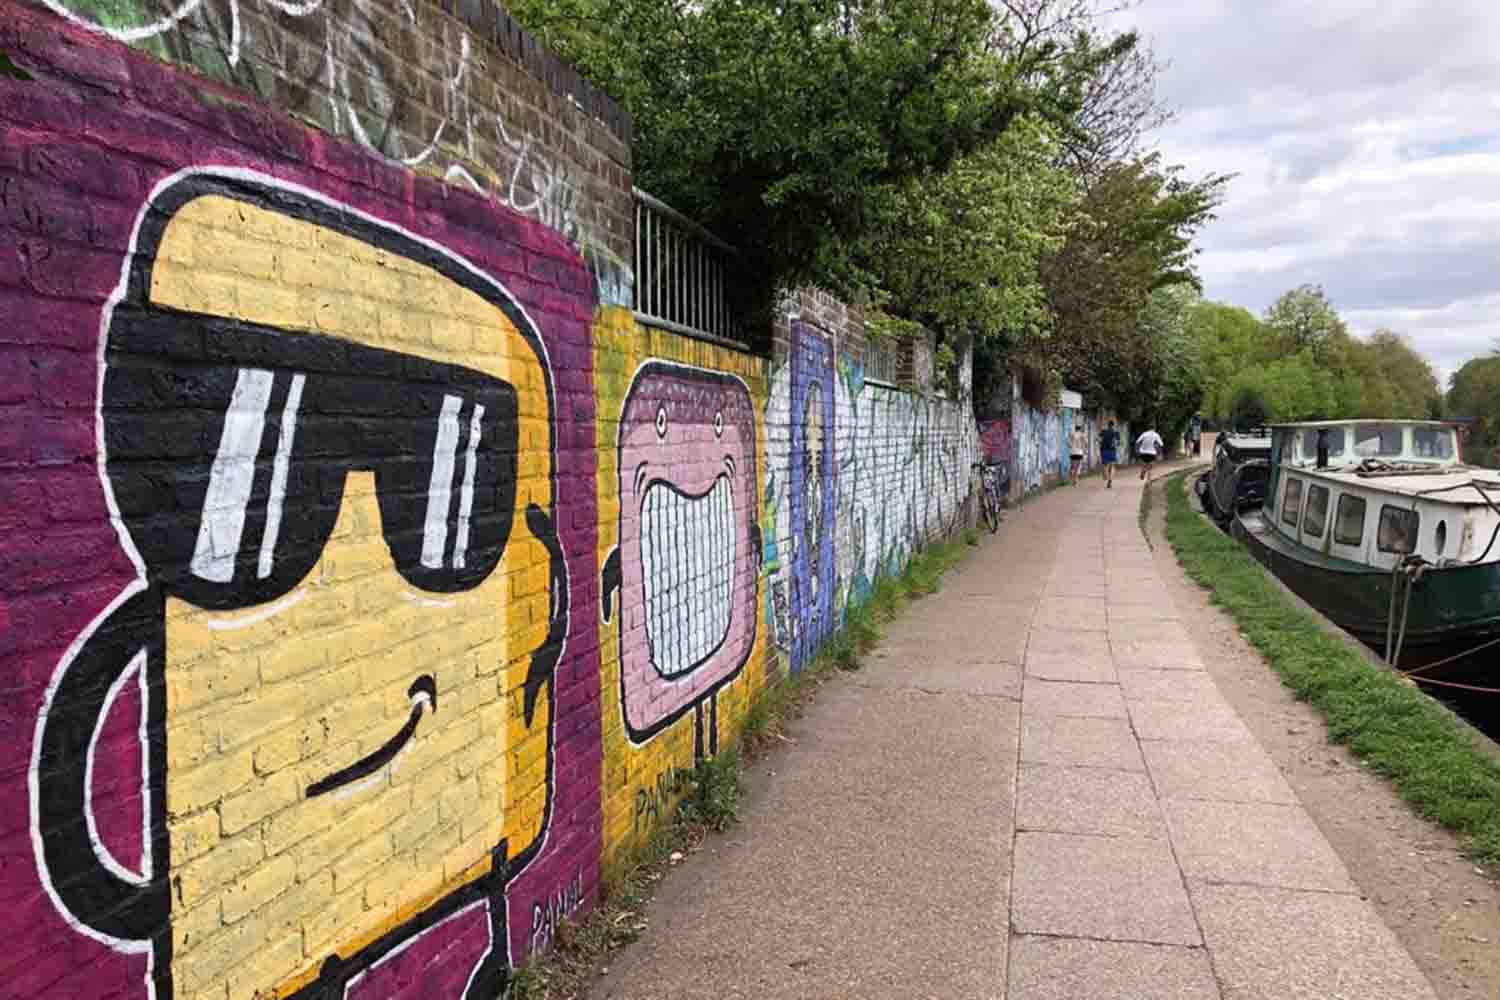 A wall lining a canal with street art depicitng cartoon-style figures.